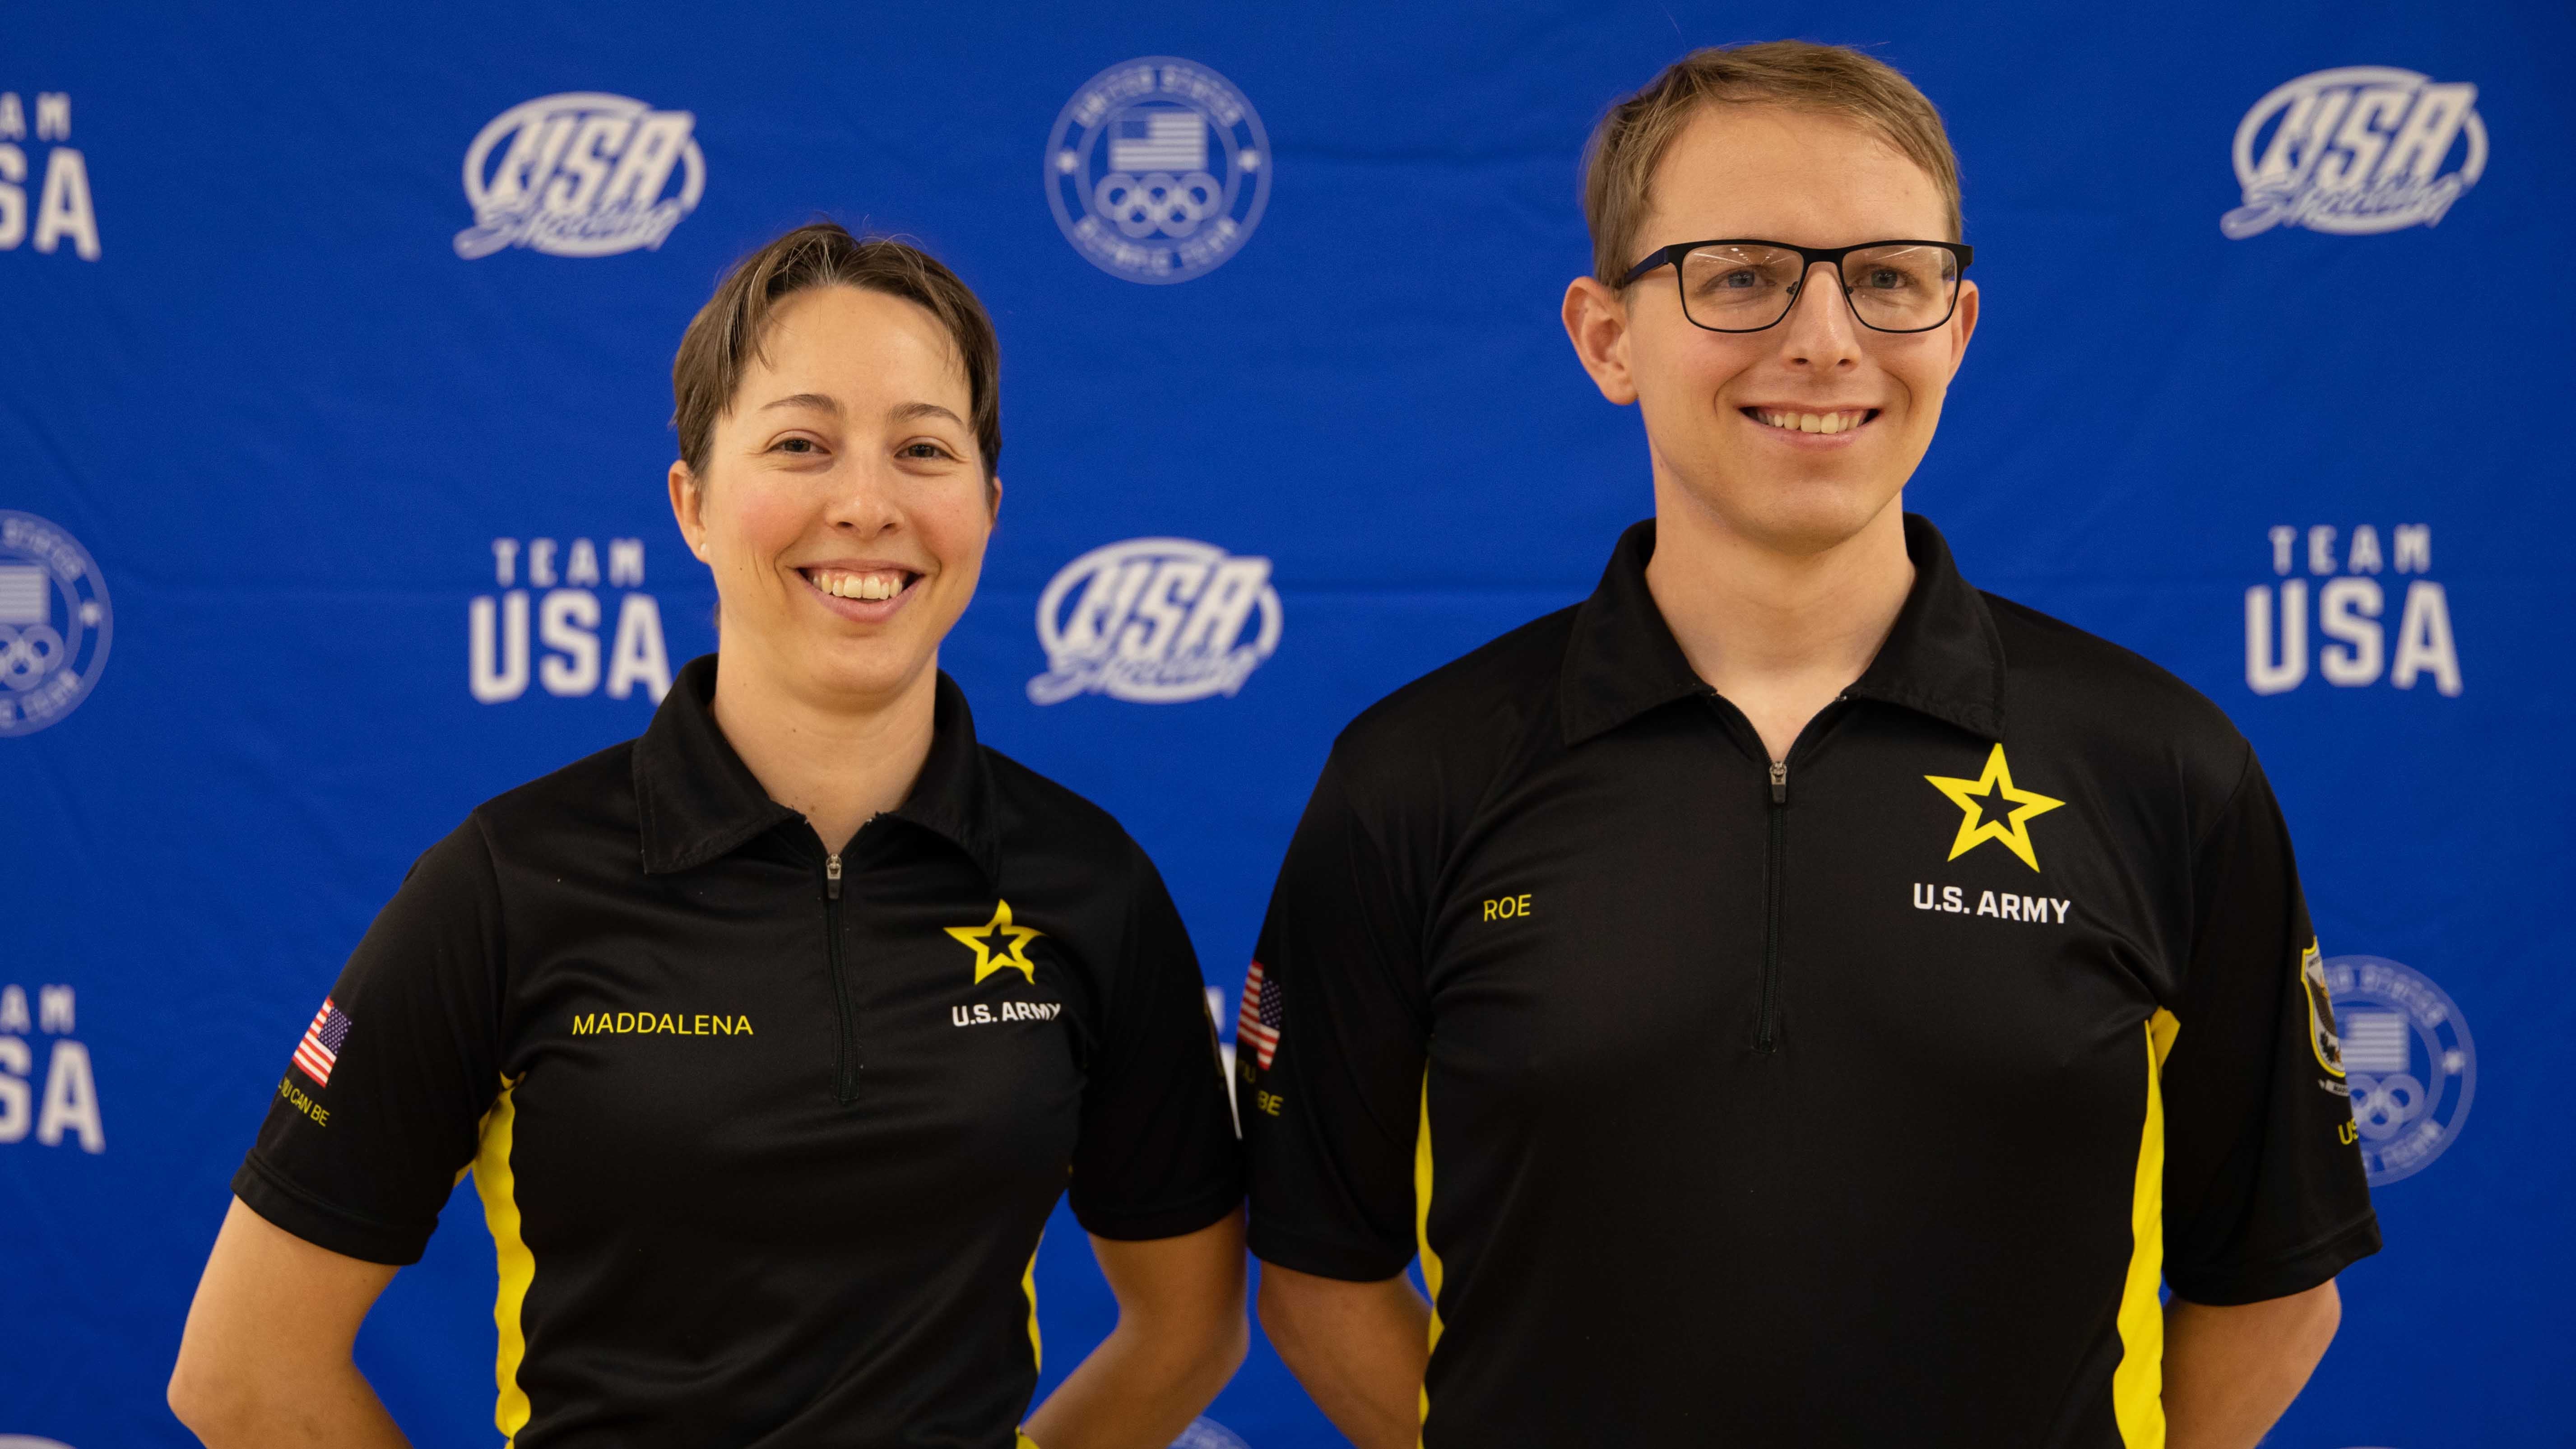 U.S. Army Sergeants Sagen Maddalena and Ivan Roe earned spots on Team USA in the 10m Air Rifle event for the 2024 Paris Olympics after completing USA Shooting’s Air Gun Olympic Trials Part 3 at the Civilian Marksmanship Program (CMP) Judith Legerski Competition Center in Anniston, Alabama, Jan. 5-7, 2024.